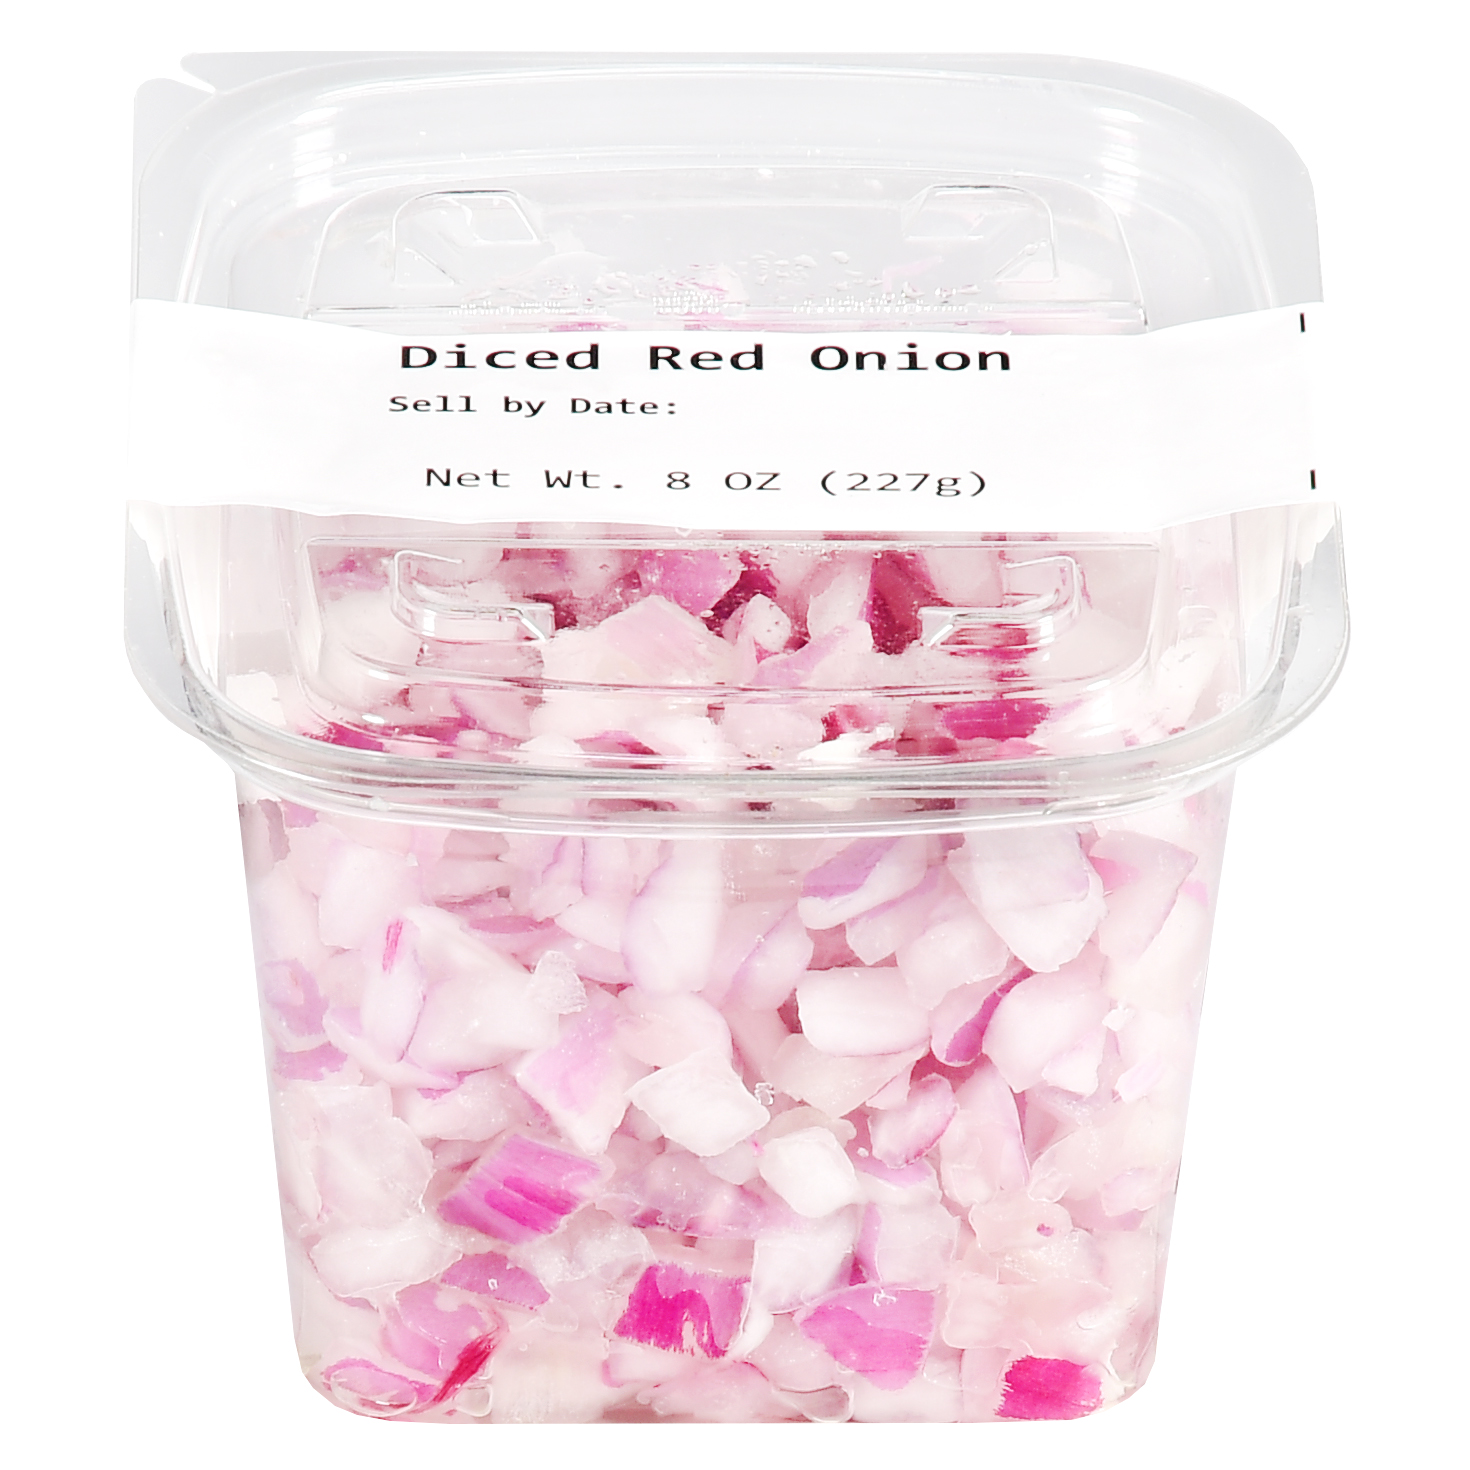 Freshness Guaranteed Diced Red Onions, 8 oz - image 5 of 5